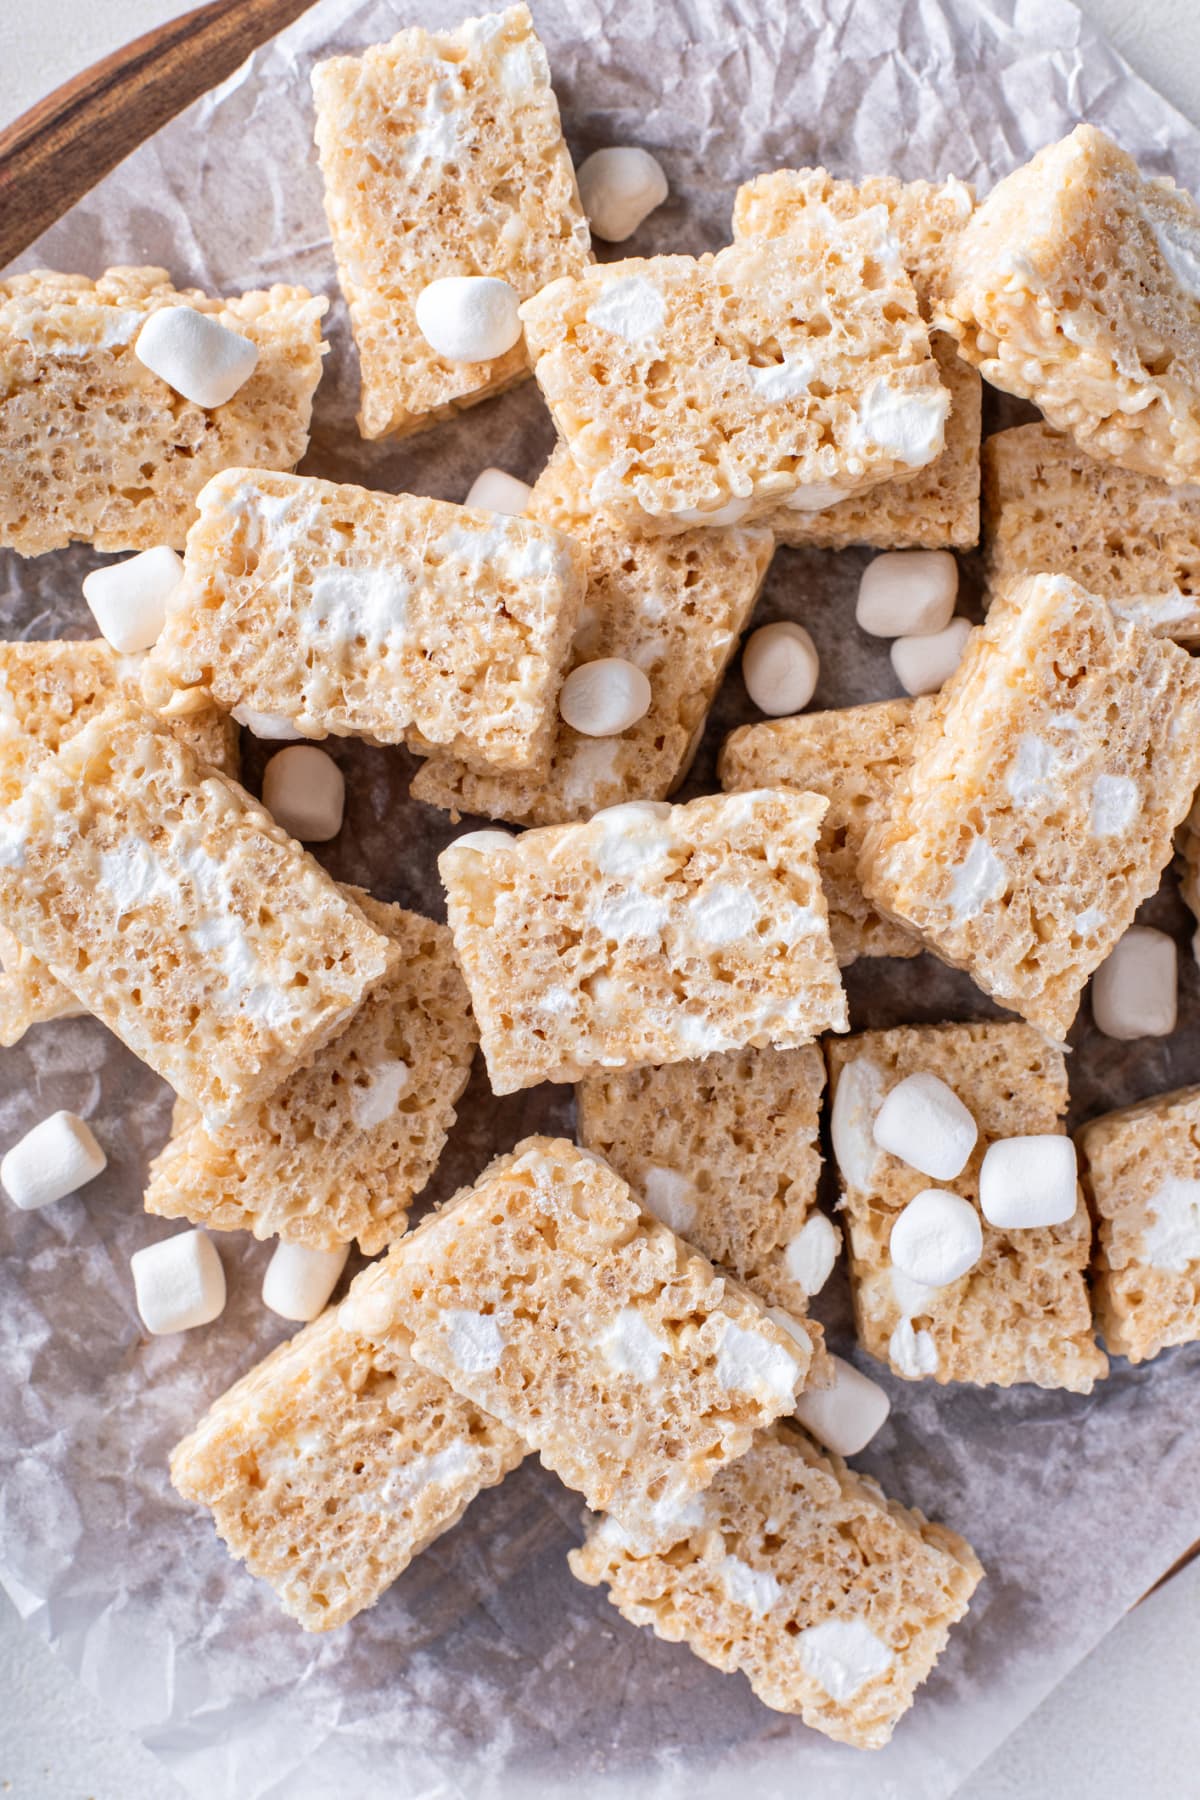 Pile of rice krispies treats with marshmallows